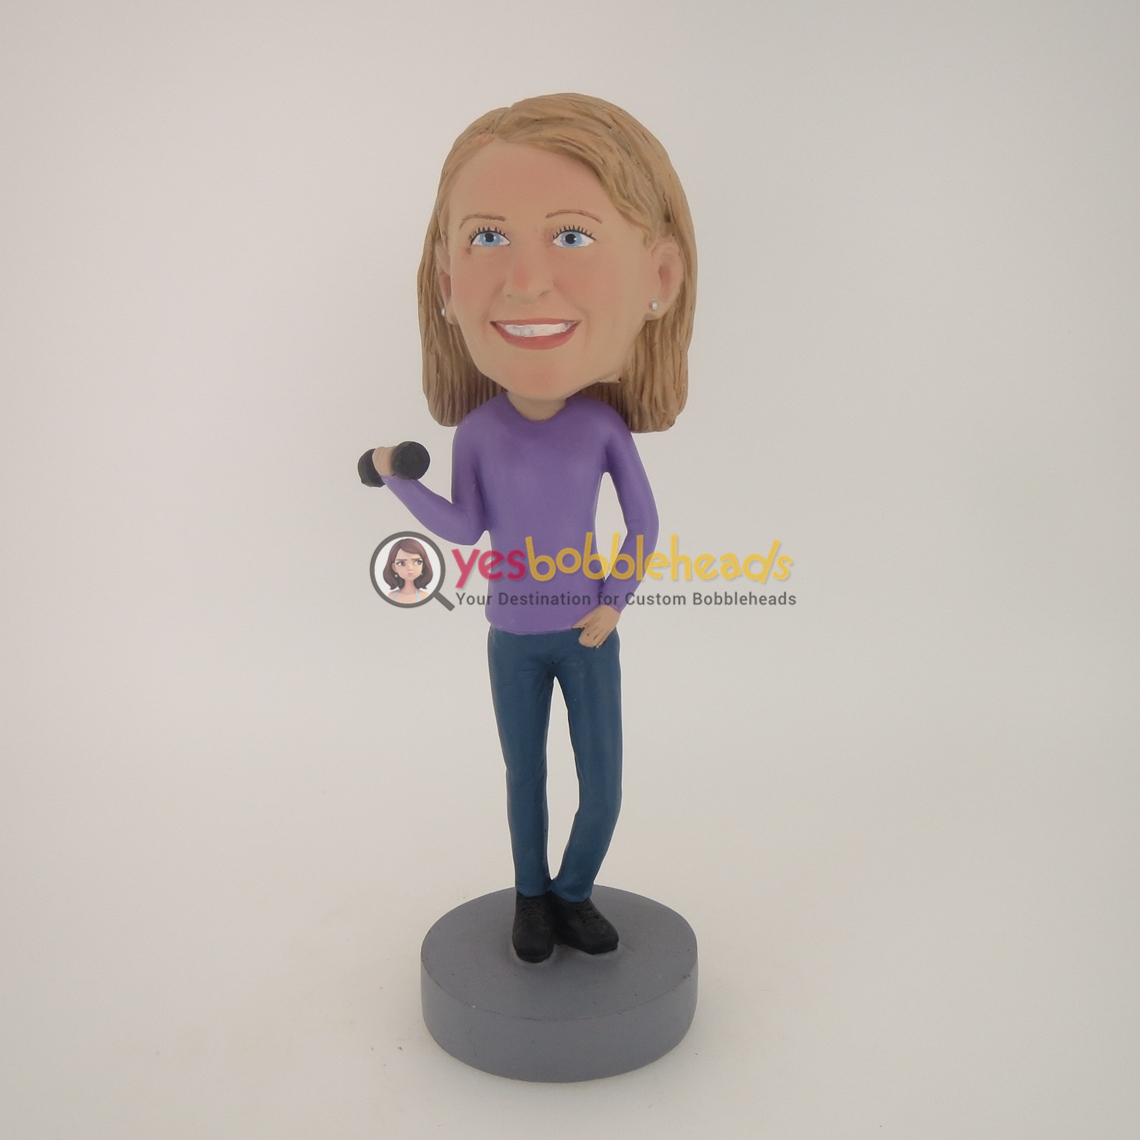 Picture of Custom Bobblehead Doll: Woman Playing Dumbbell